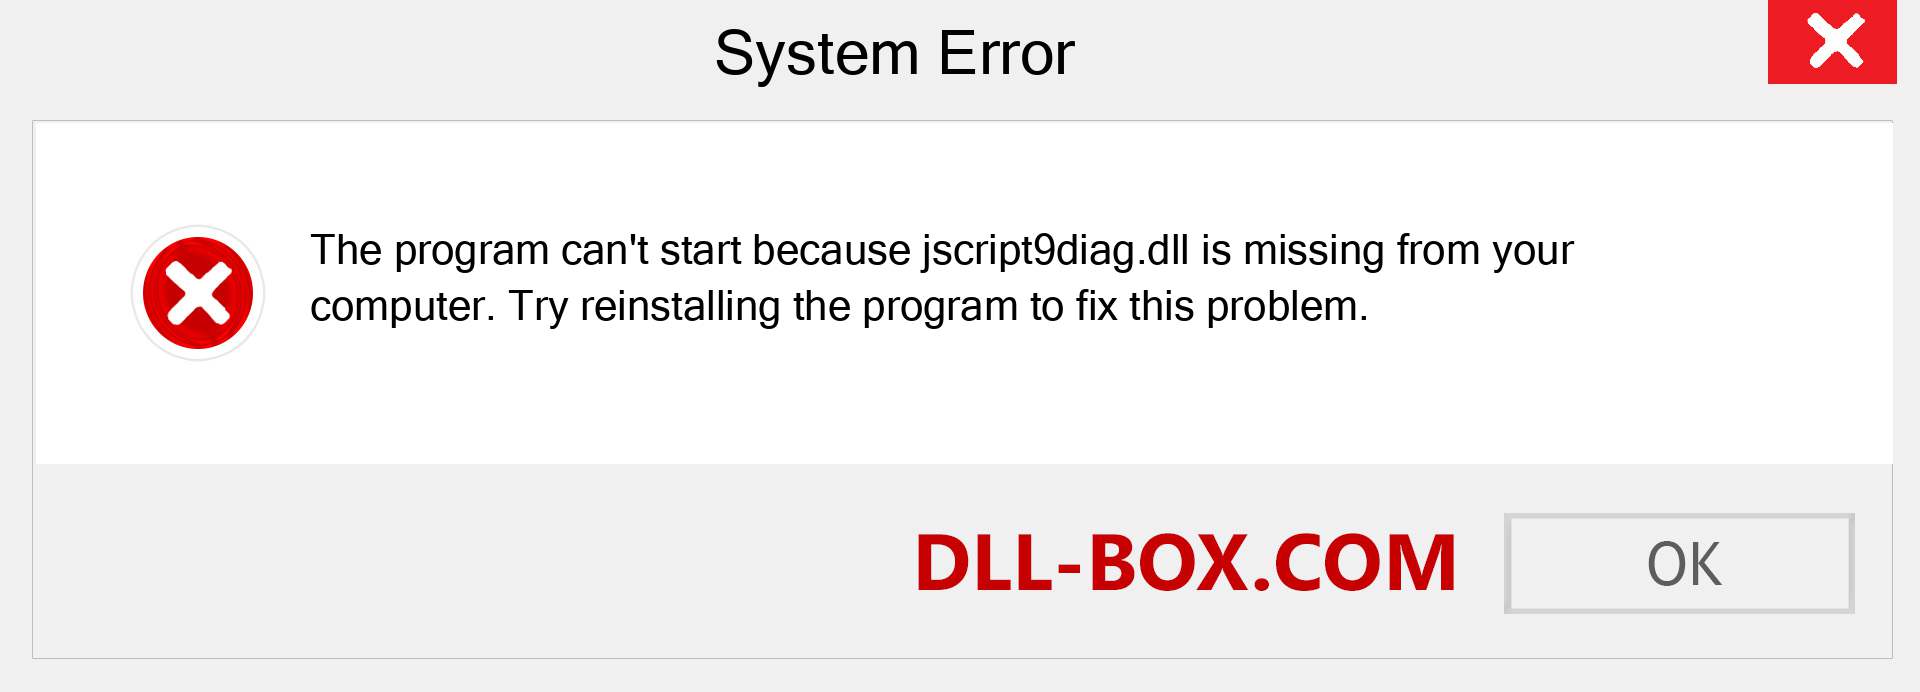  jscript9diag.dll file is missing?. Download for Windows 7, 8, 10 - Fix  jscript9diag dll Missing Error on Windows, photos, images